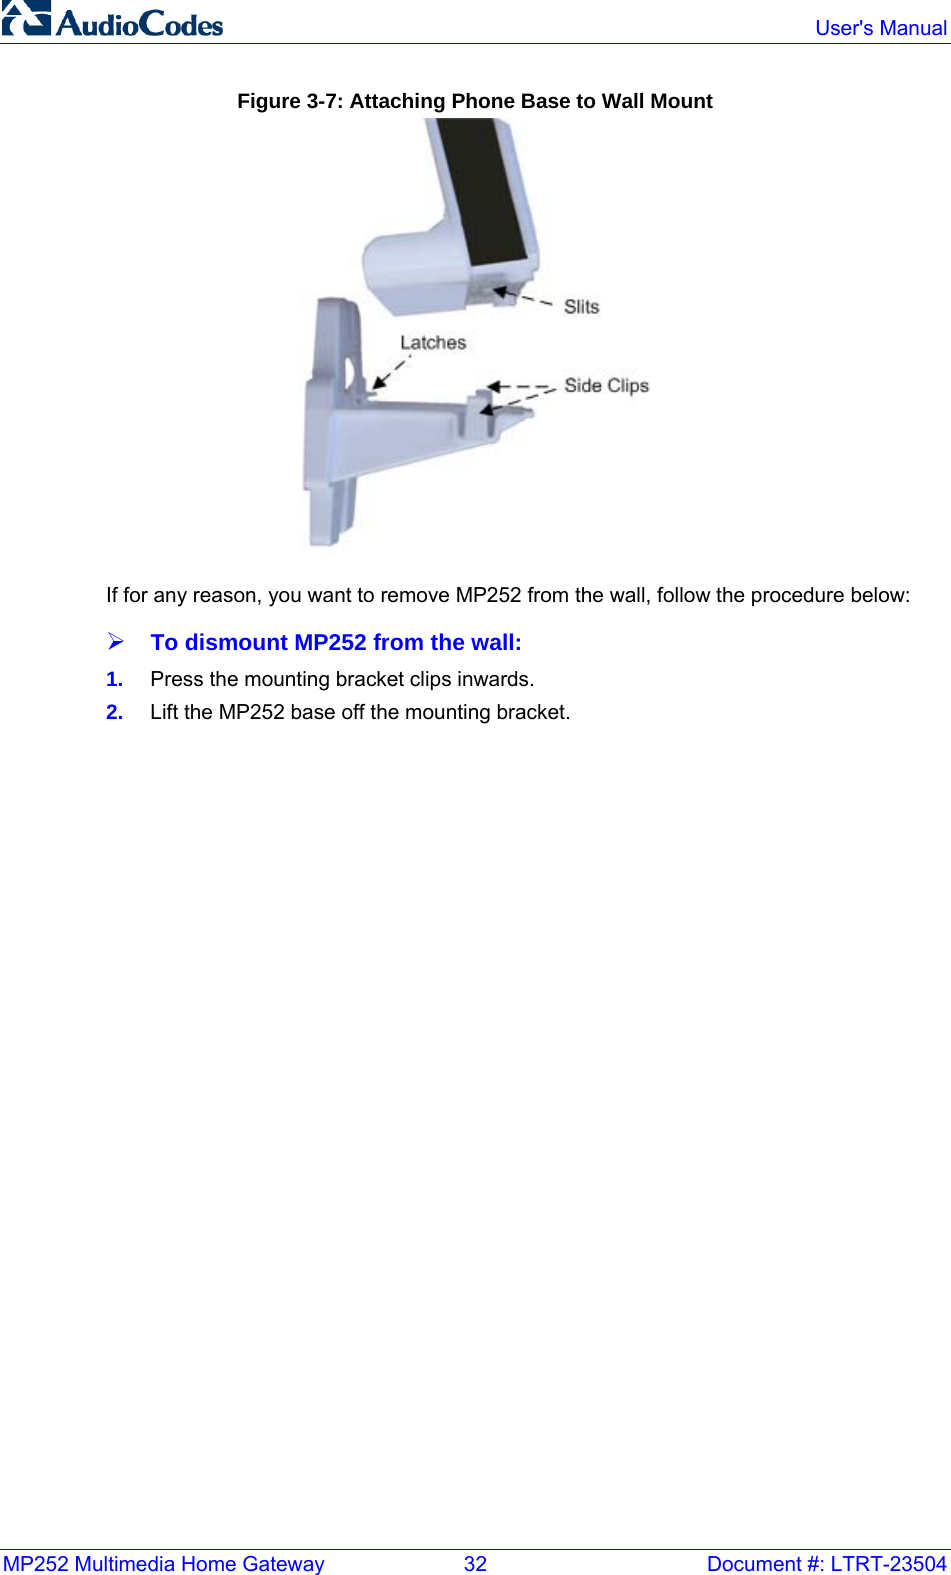 MP252 Multimedia Home Gateway  32  Document #: LTRT-23504  User&apos;s Manual Figure 3-7: Attaching Phone Base to Wall Mount  If for any reason, you want to remove MP252 from the wall, follow the procedure below: ¾ To dismount MP252 from the wall: 1.  Press the mounting bracket clips inwards. 2.  Lift the MP252 base off the mounting bracket.    